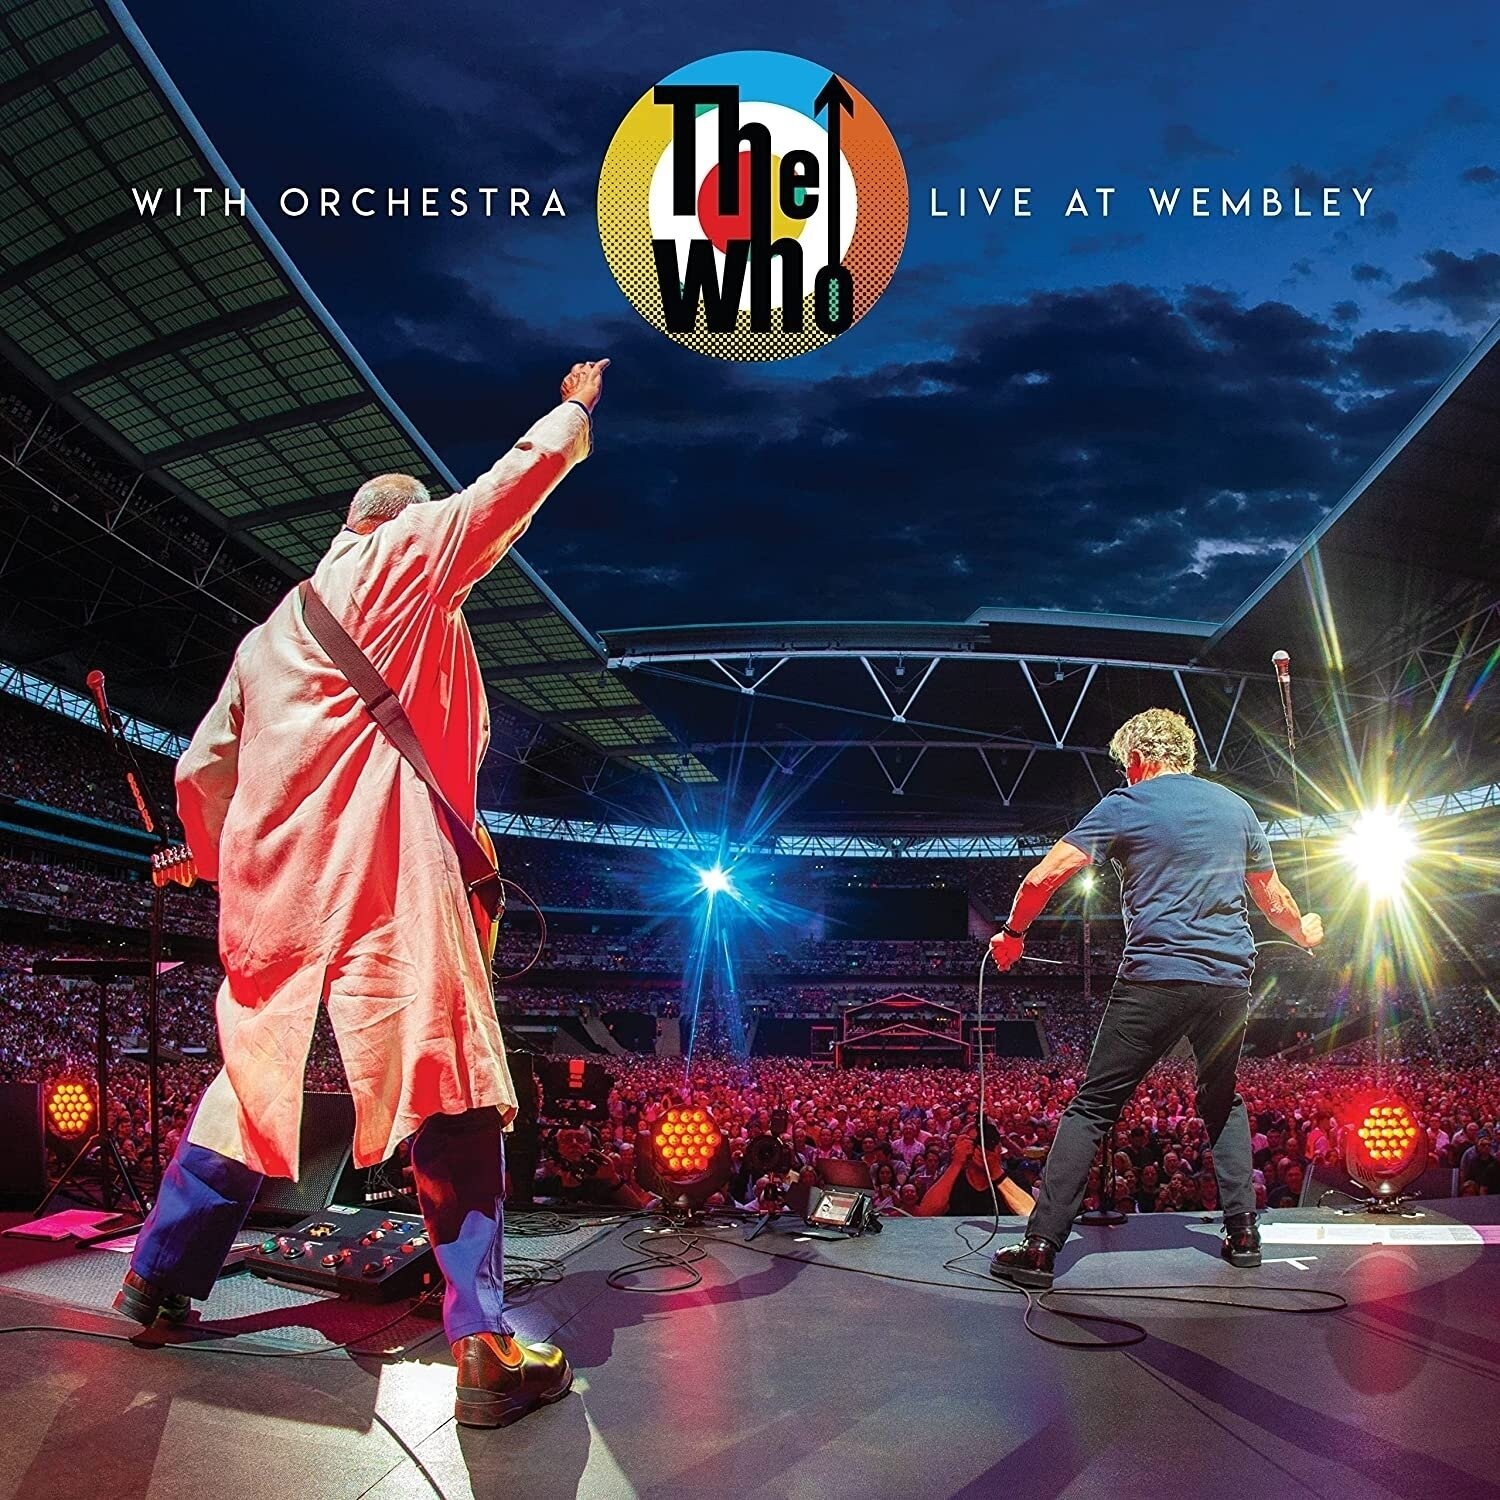 Muziek CD The Who - With Orchestra: Live At Wembley (2 CD + Blu-ray)